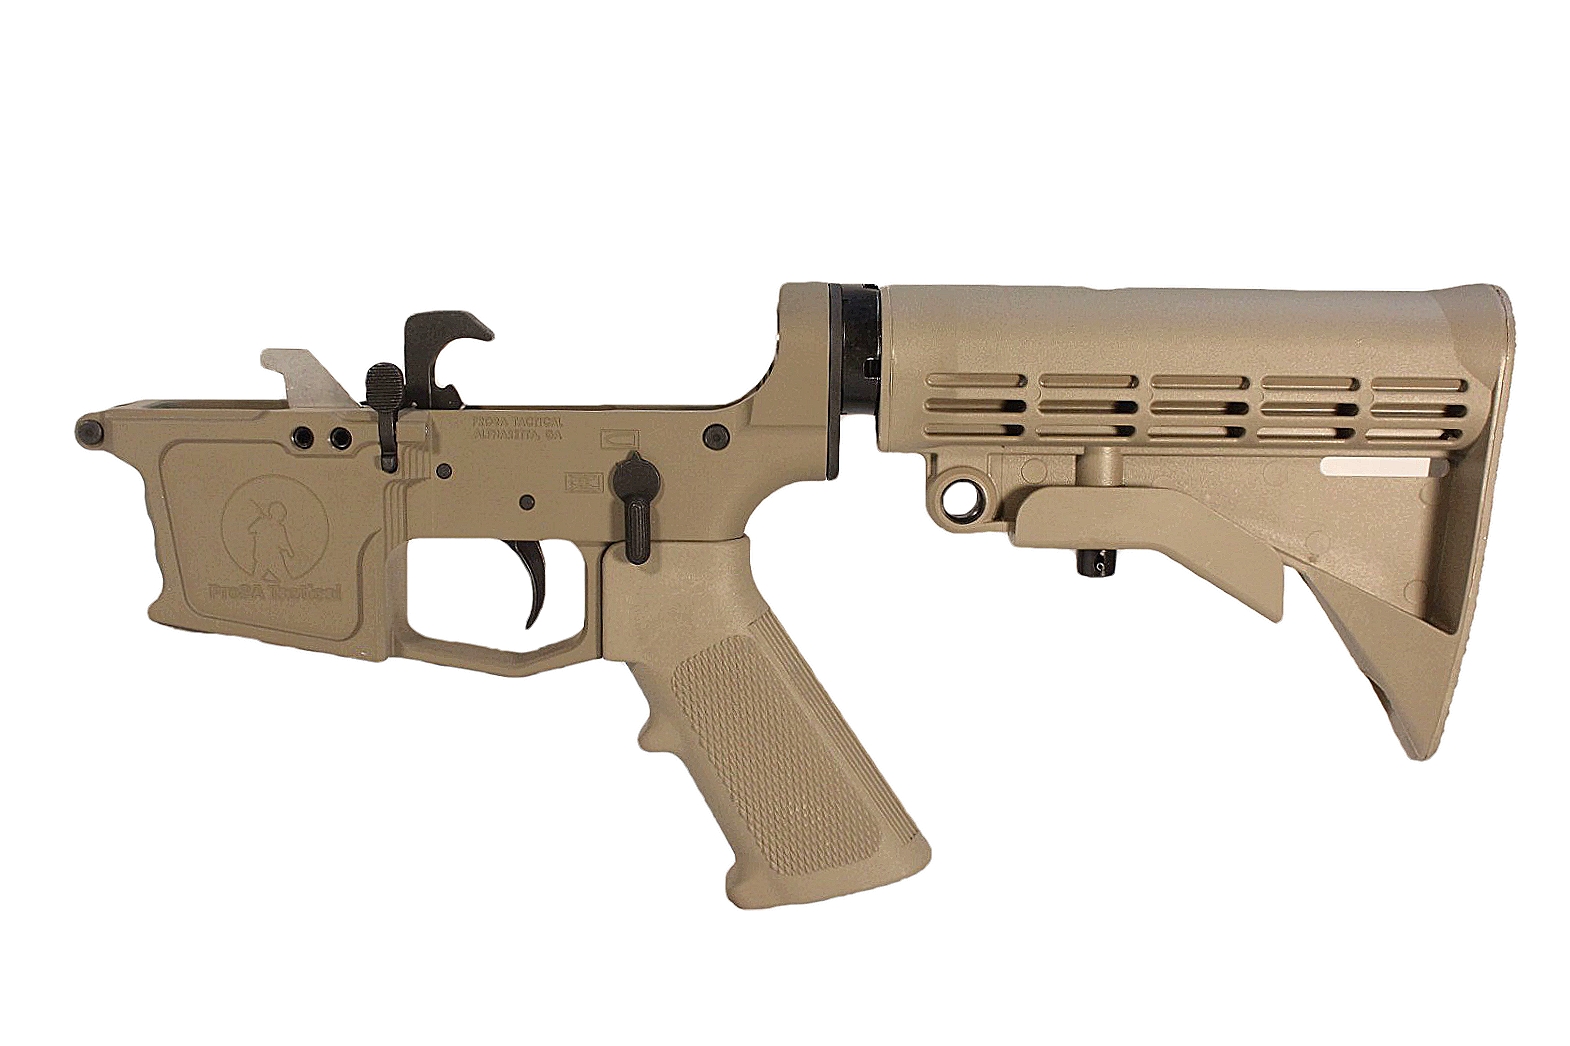 Complete Rifle AR-9 9mm / 40 S&W Billet Lower Receiver FDE Color | Pro2a Tactical